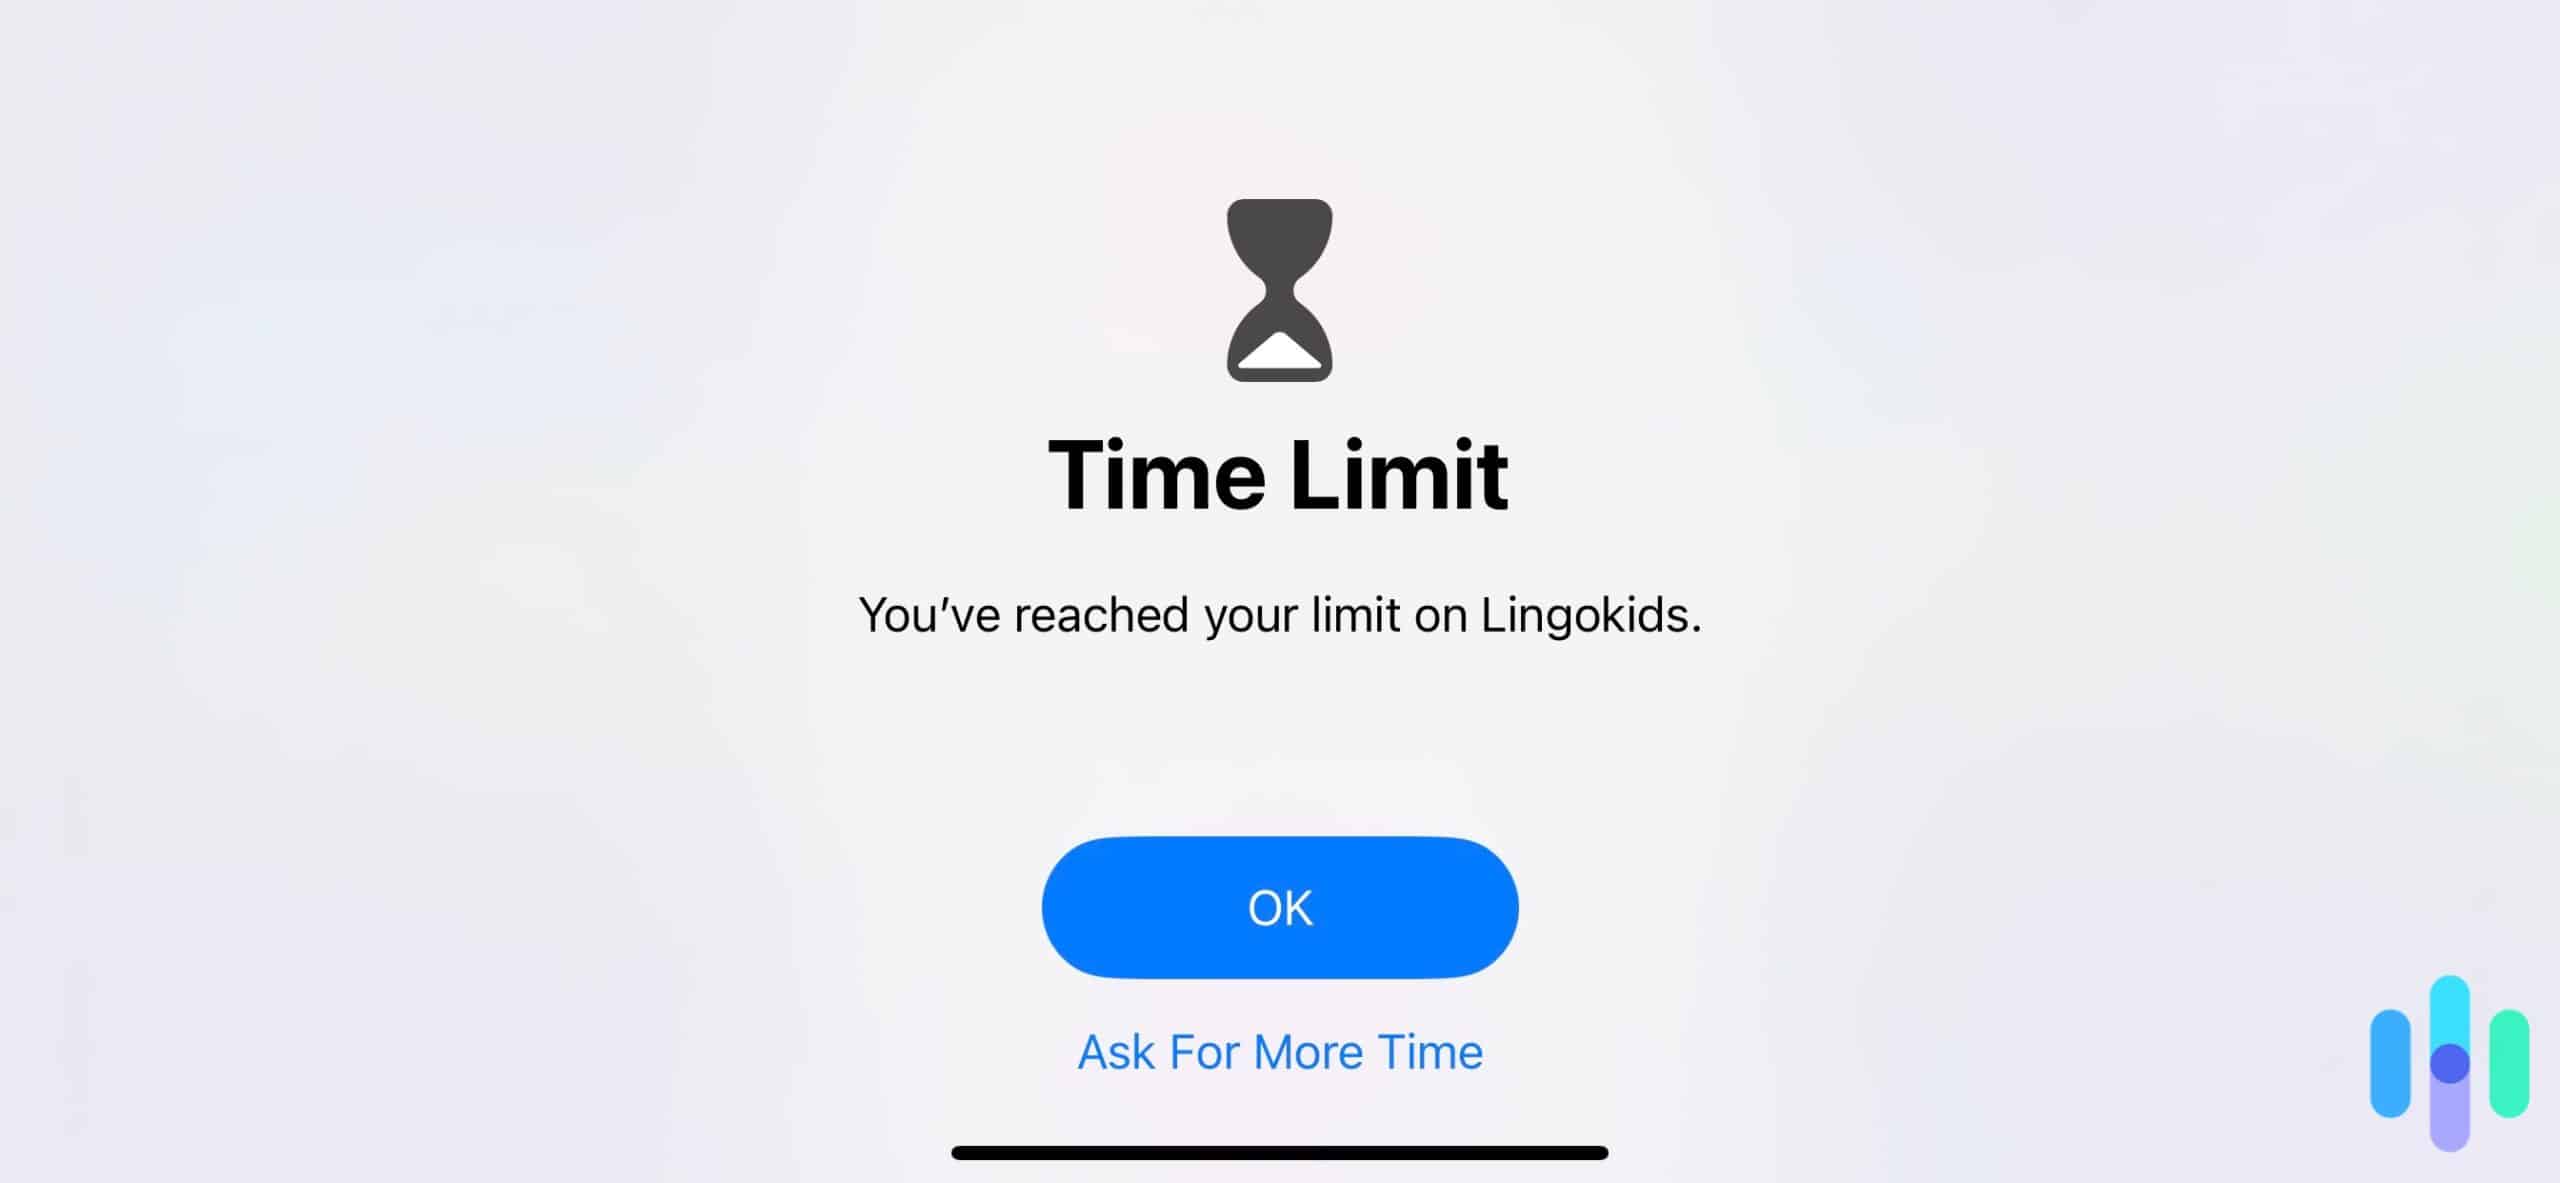 Time Limit prompt when Downtime is active